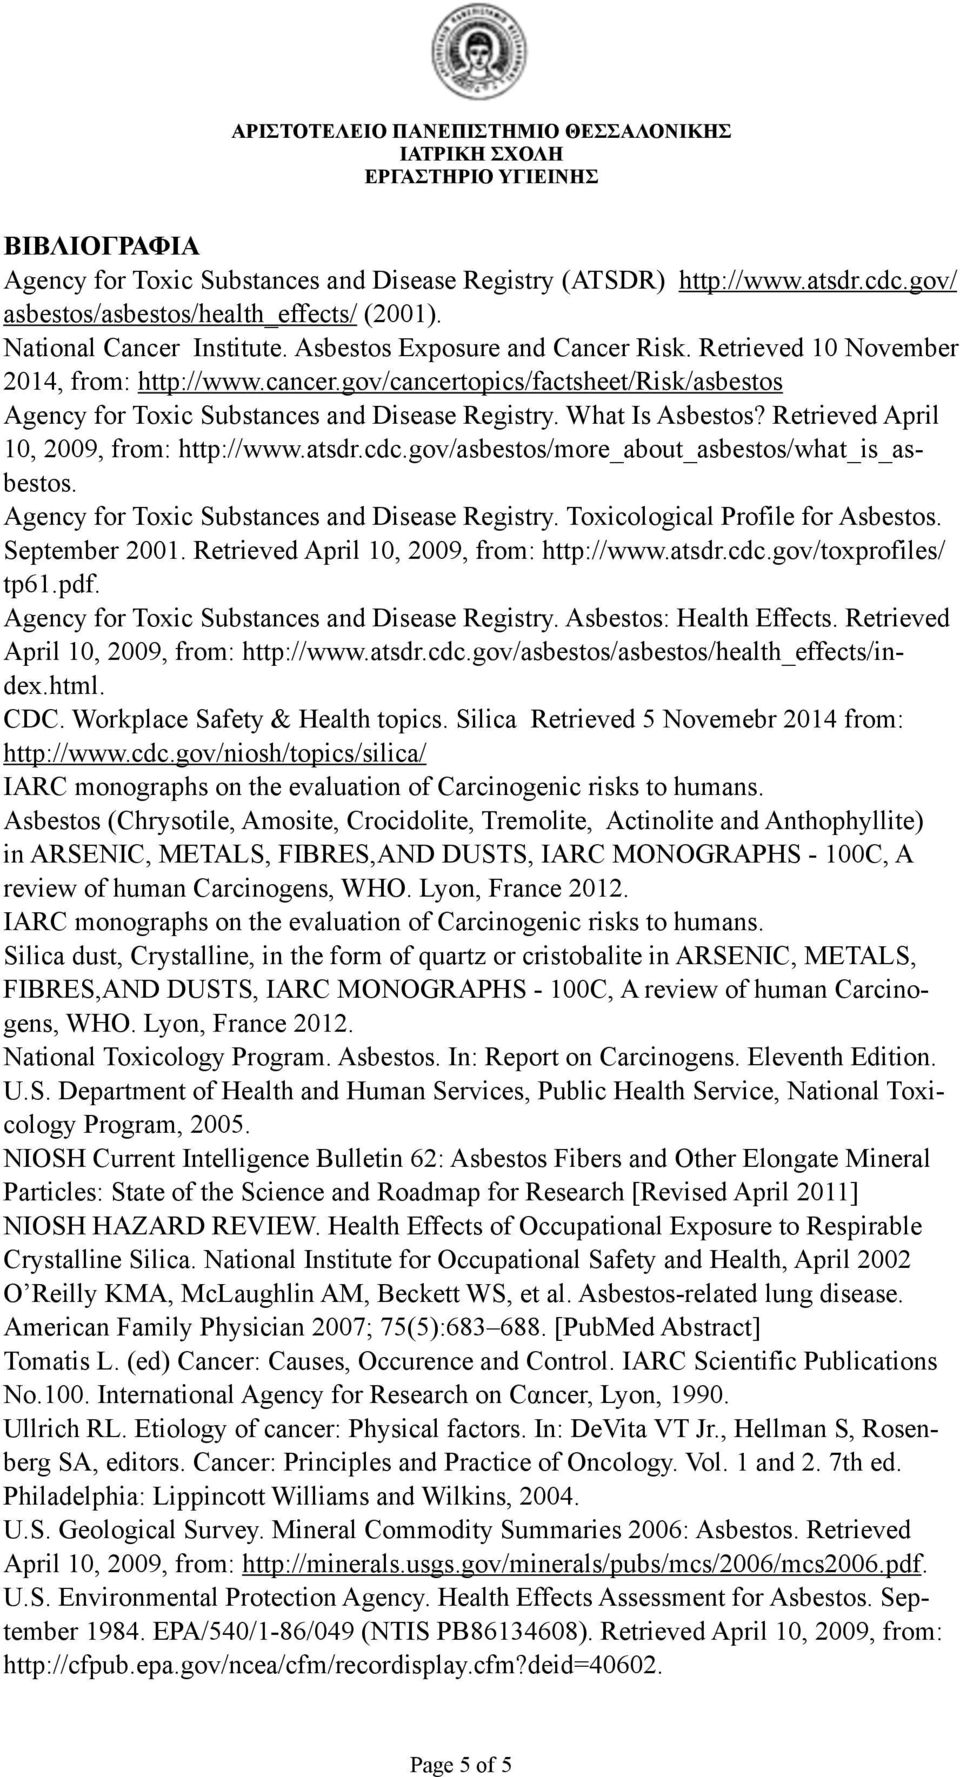 Retrieved April 10, 2009, from: http://www.atsdr.cdc.gov/asbestos/more_about_asbestos/what_is_asbestos. Agency for Toxic Substances and Disease Registry. Toxicological Profile for Asbestos.